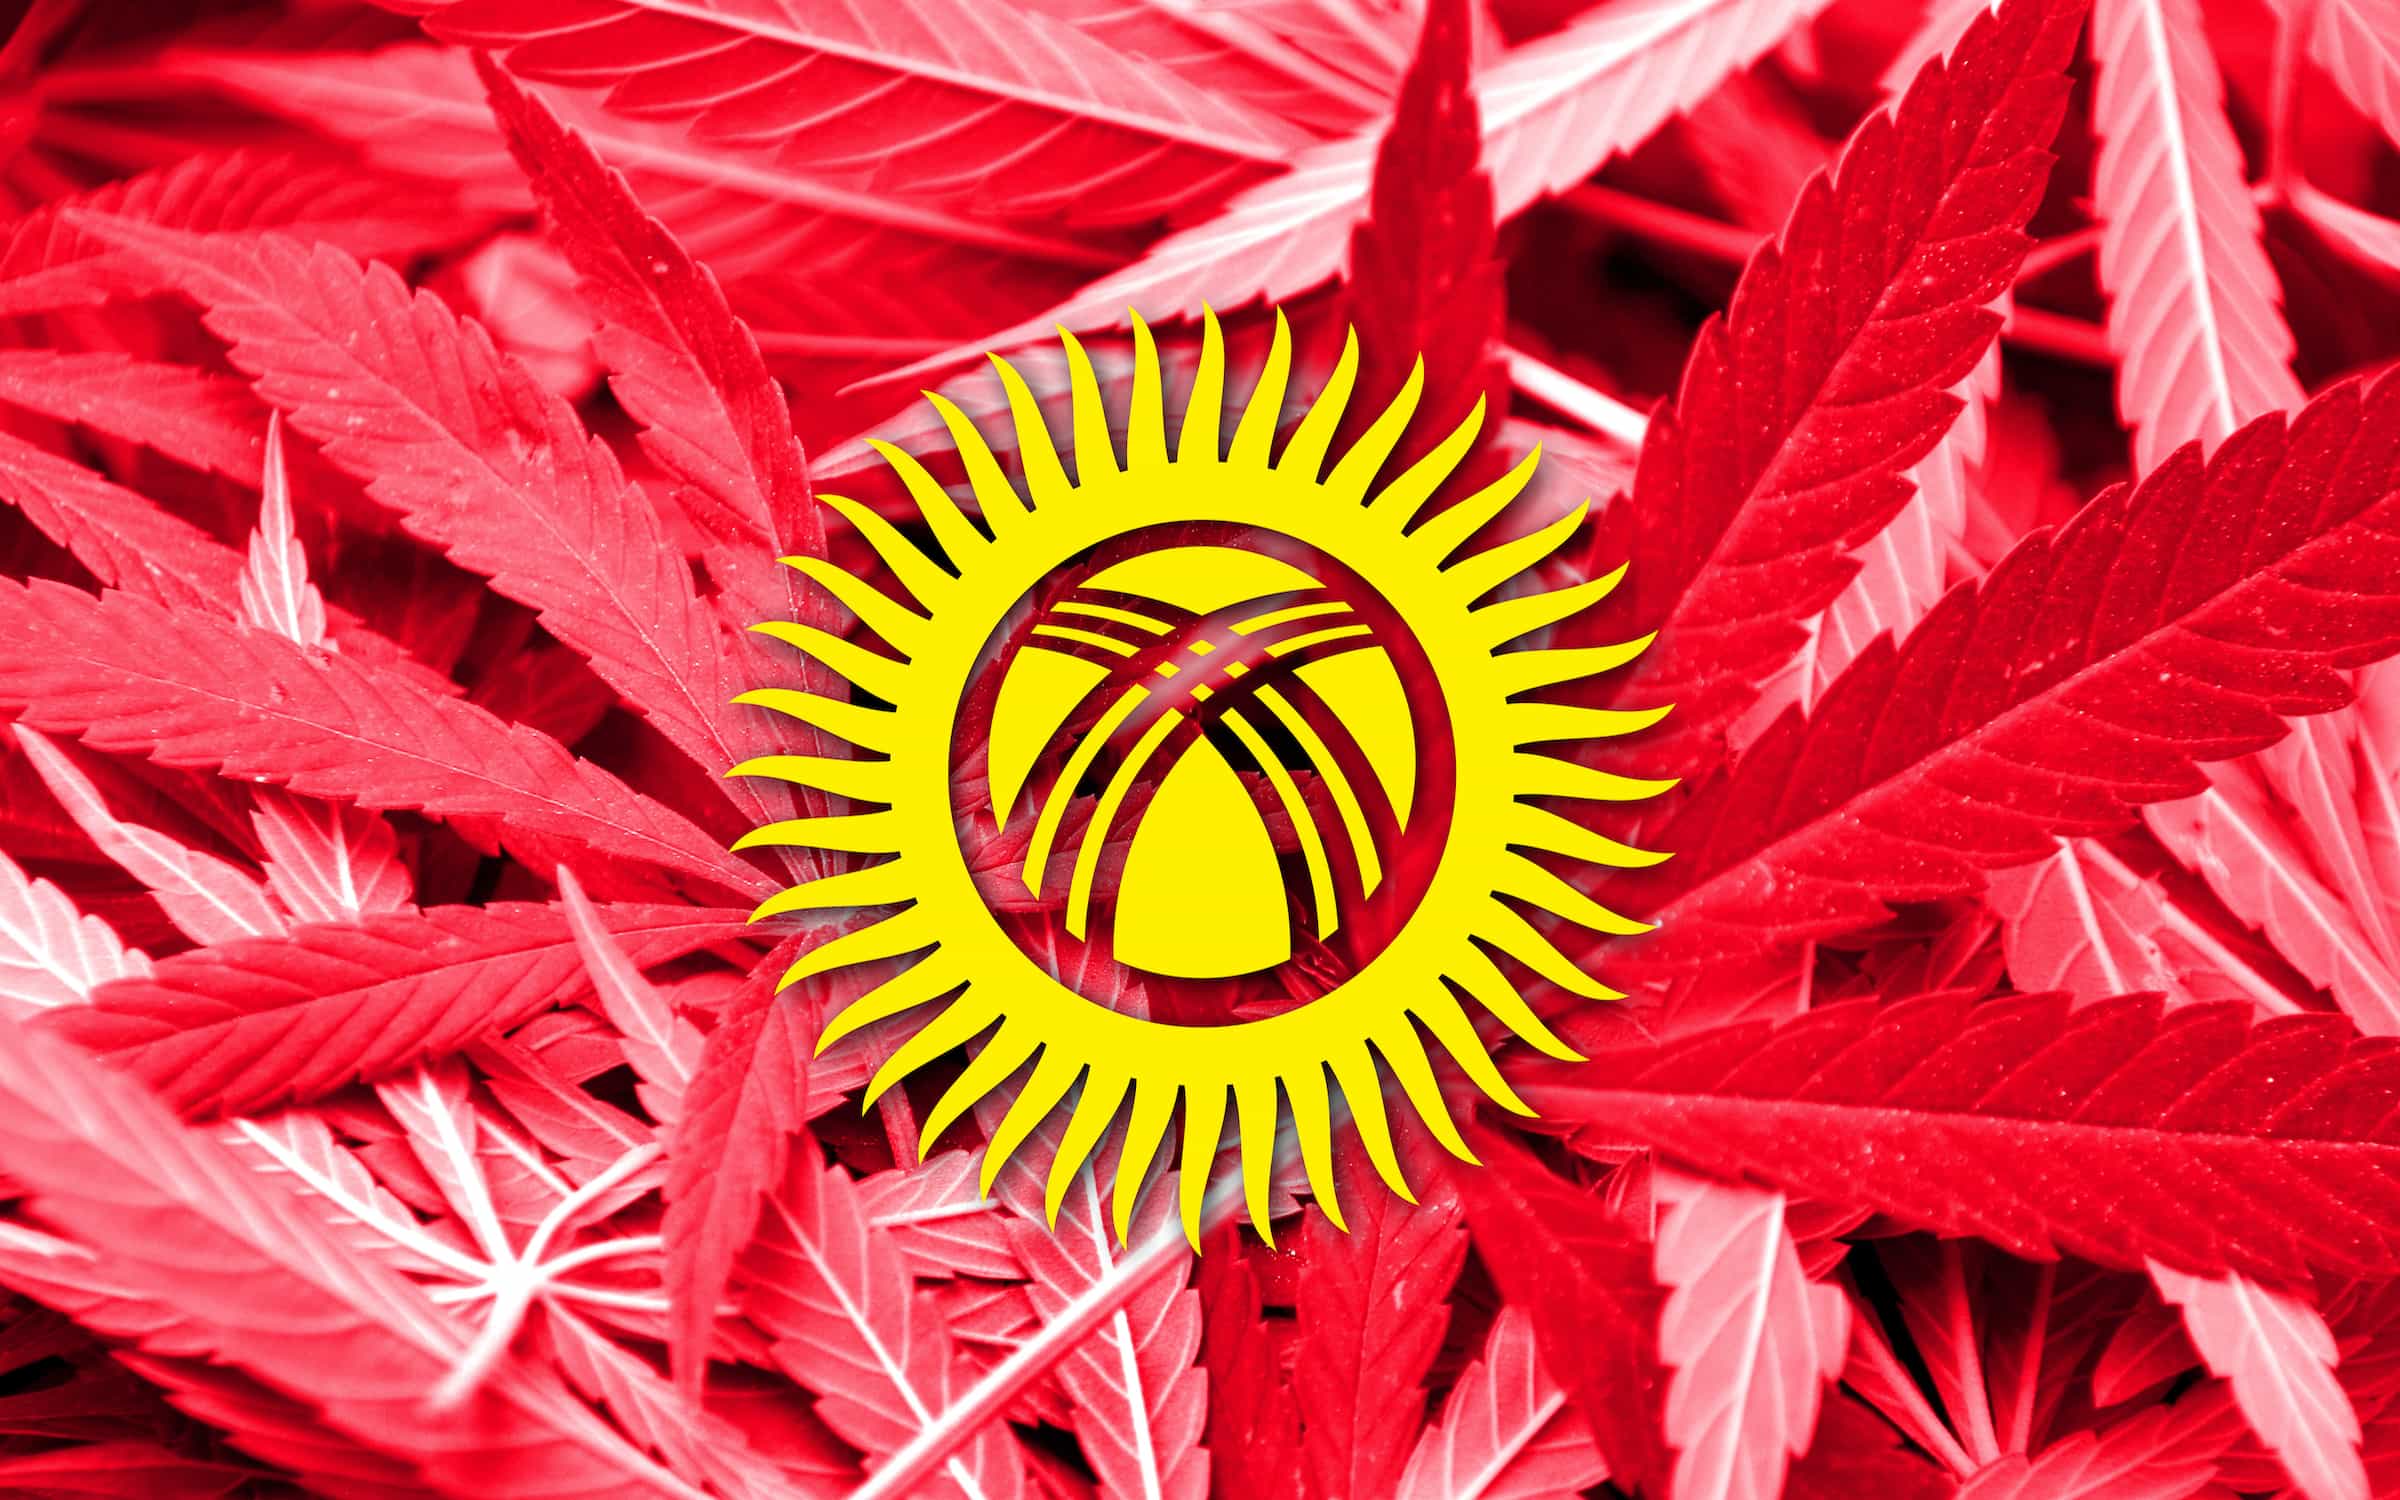 Kyrgyzstan Could Bring Legal Cannabis To Central Asia Region